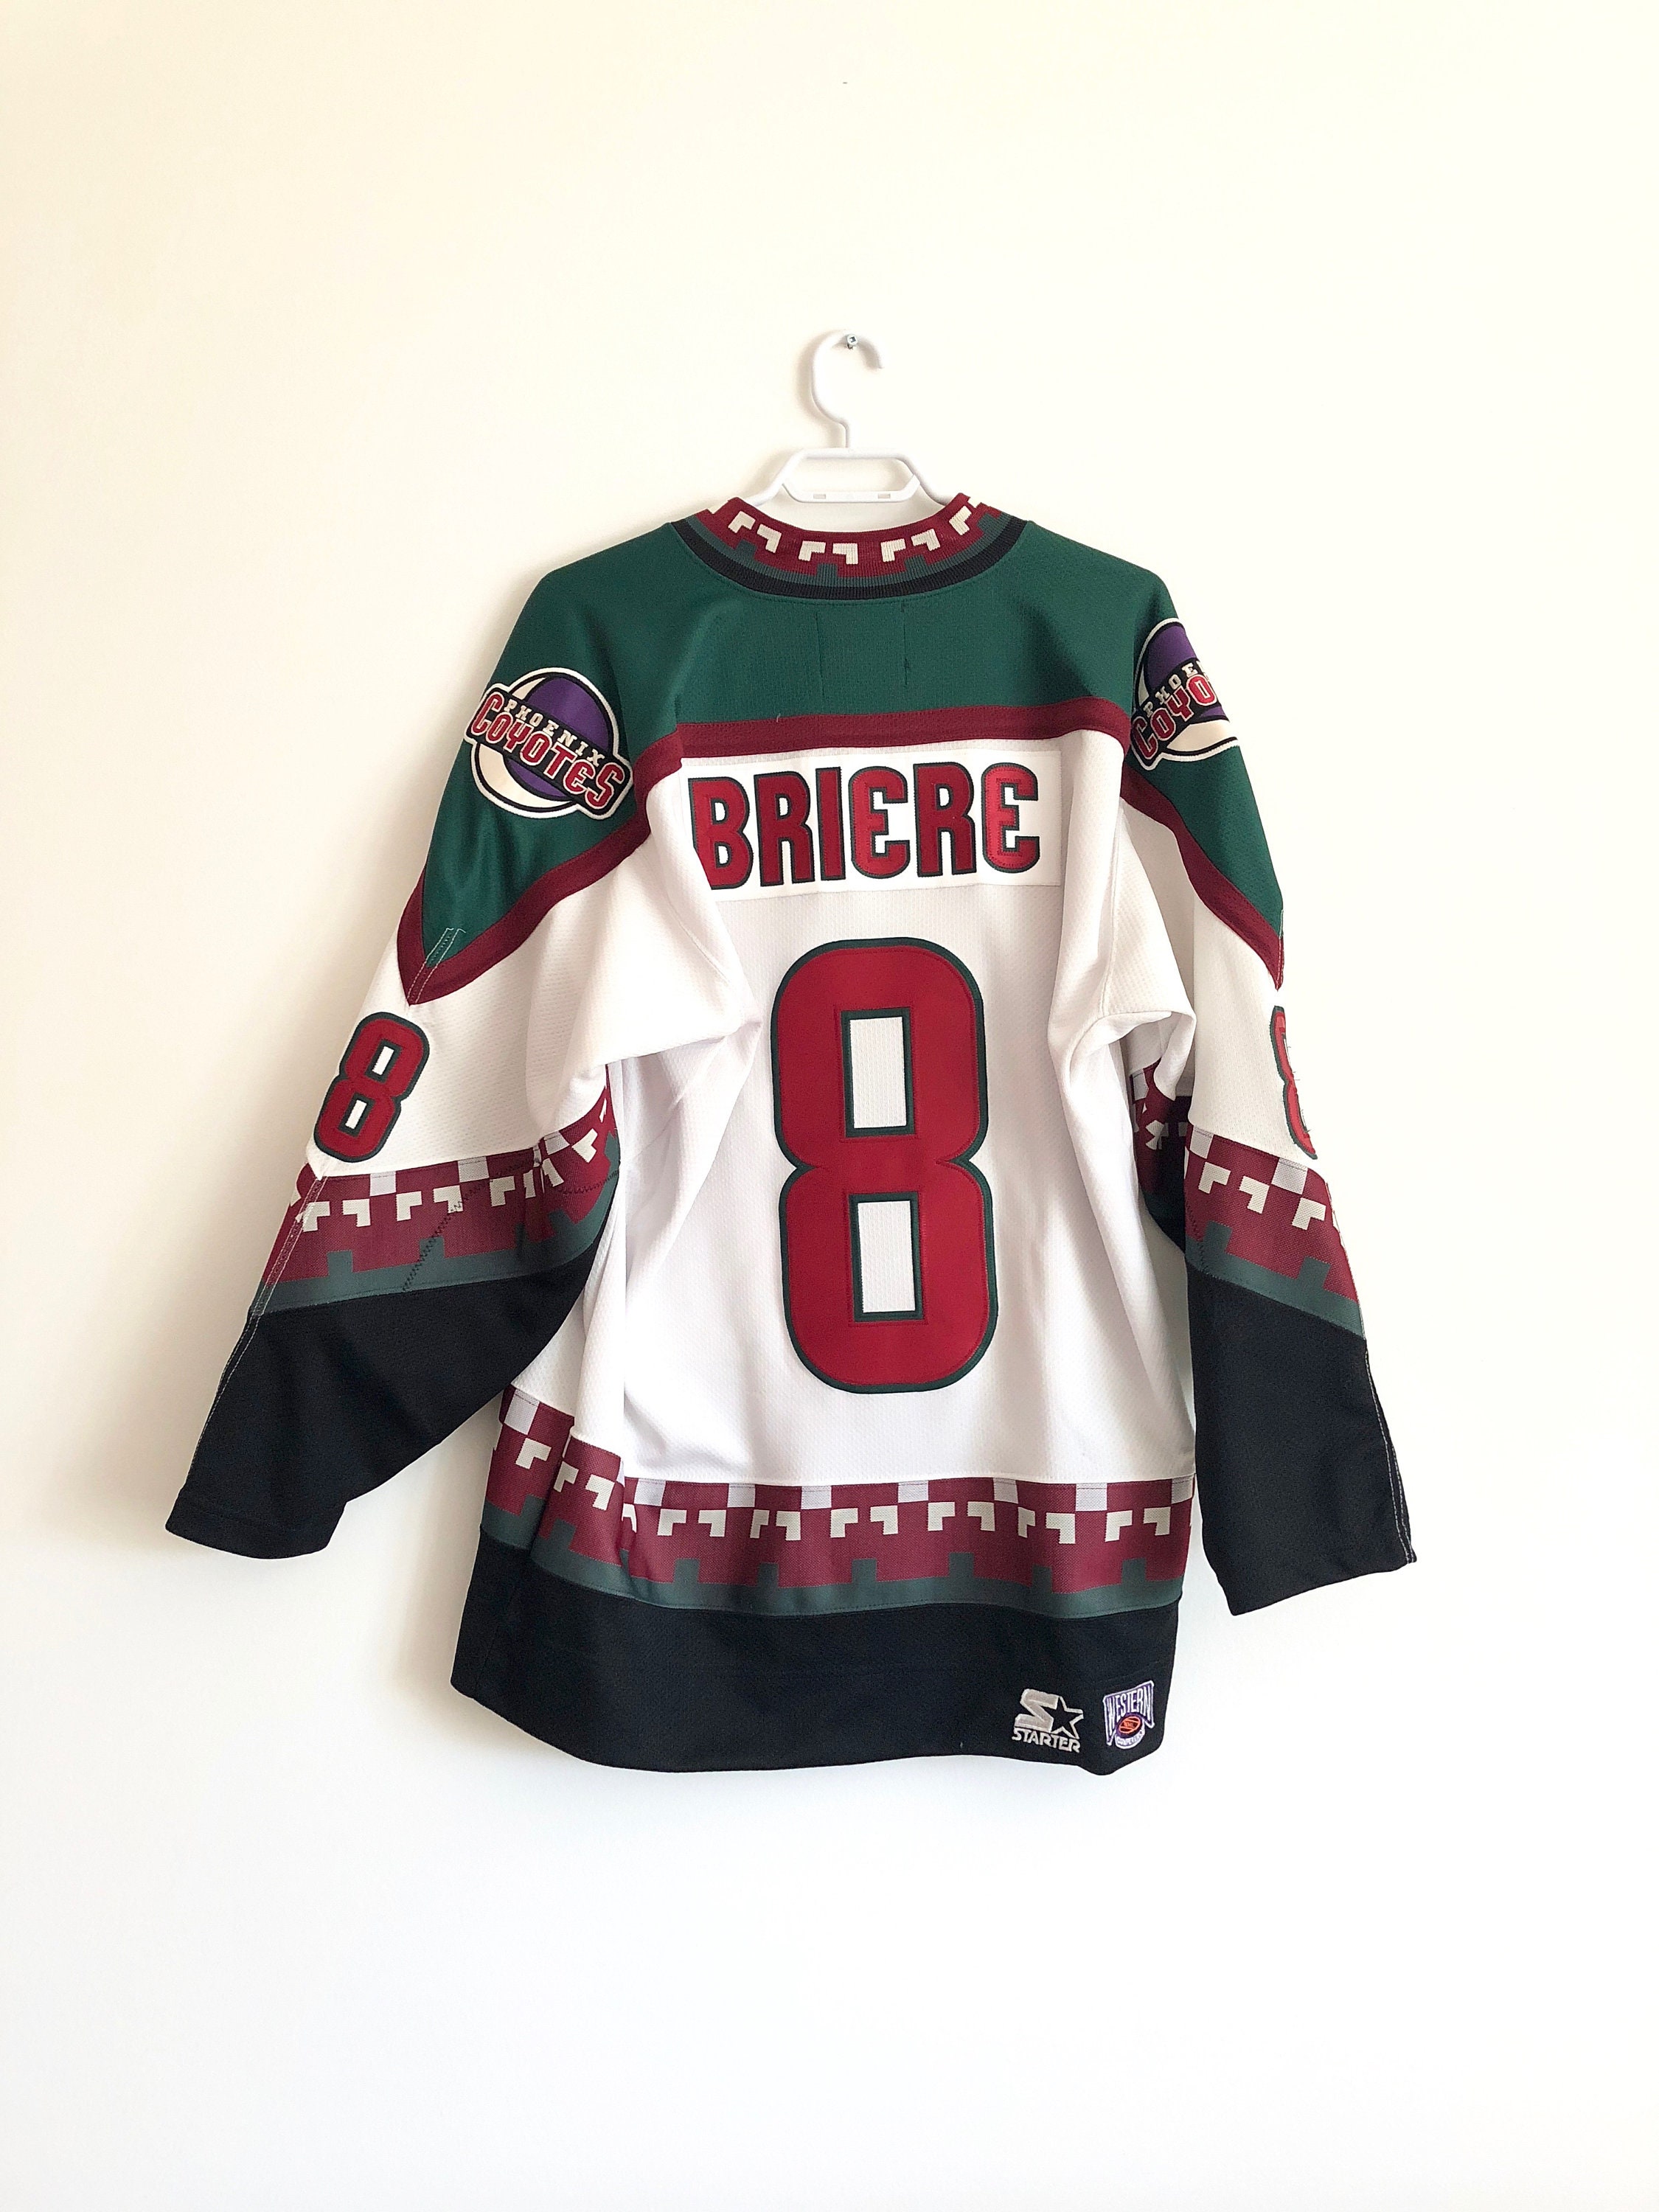 daniel briere jersey products for sale